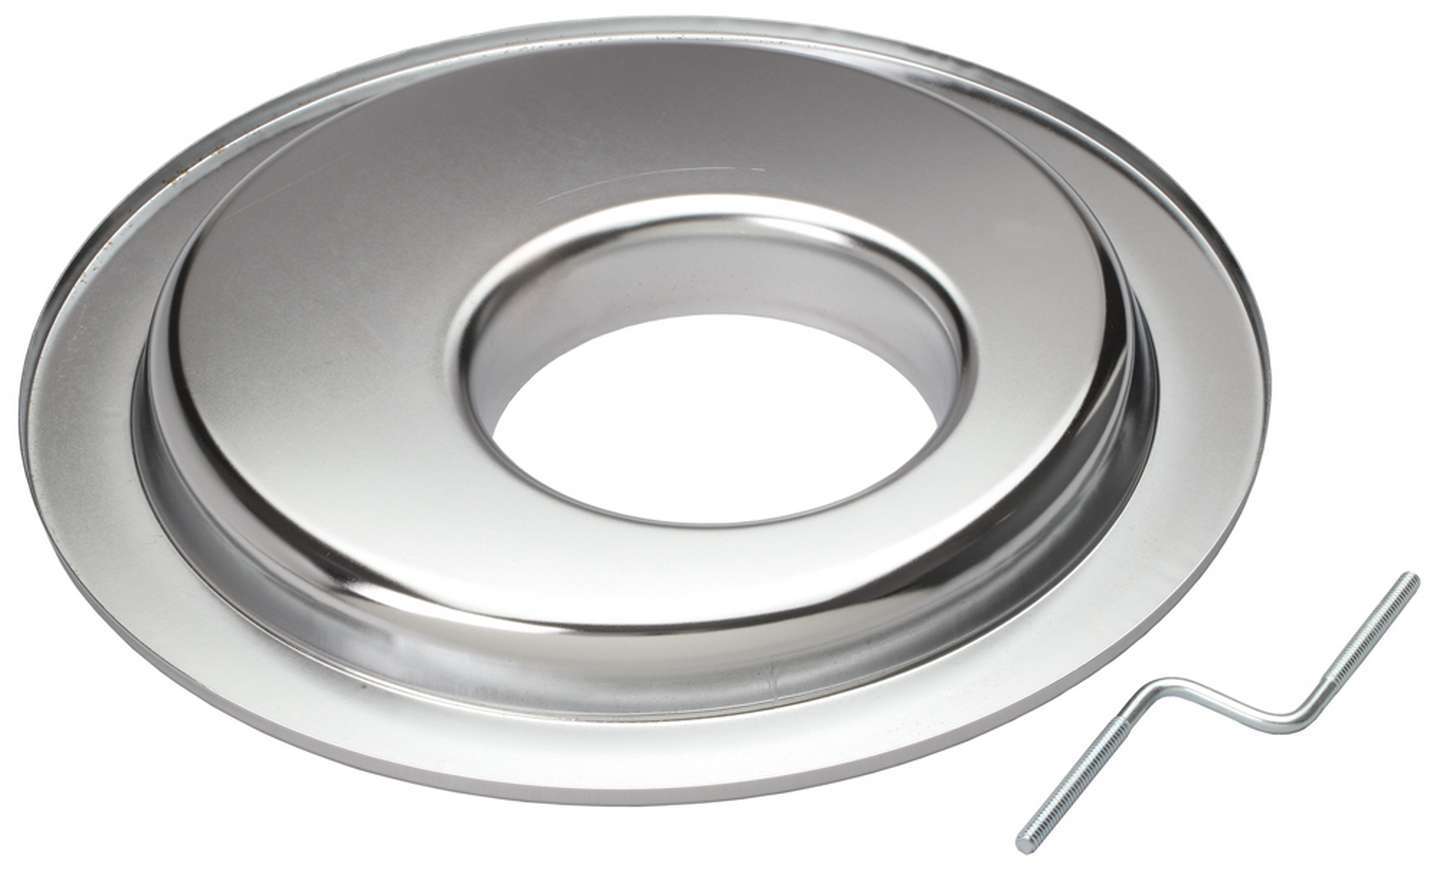 Trans Dapt 2430 Air Cleaner Base, 14 in Round, 5-1/8 in Carb Flange, Offset, Flat Base, Steel, Chrome, Each